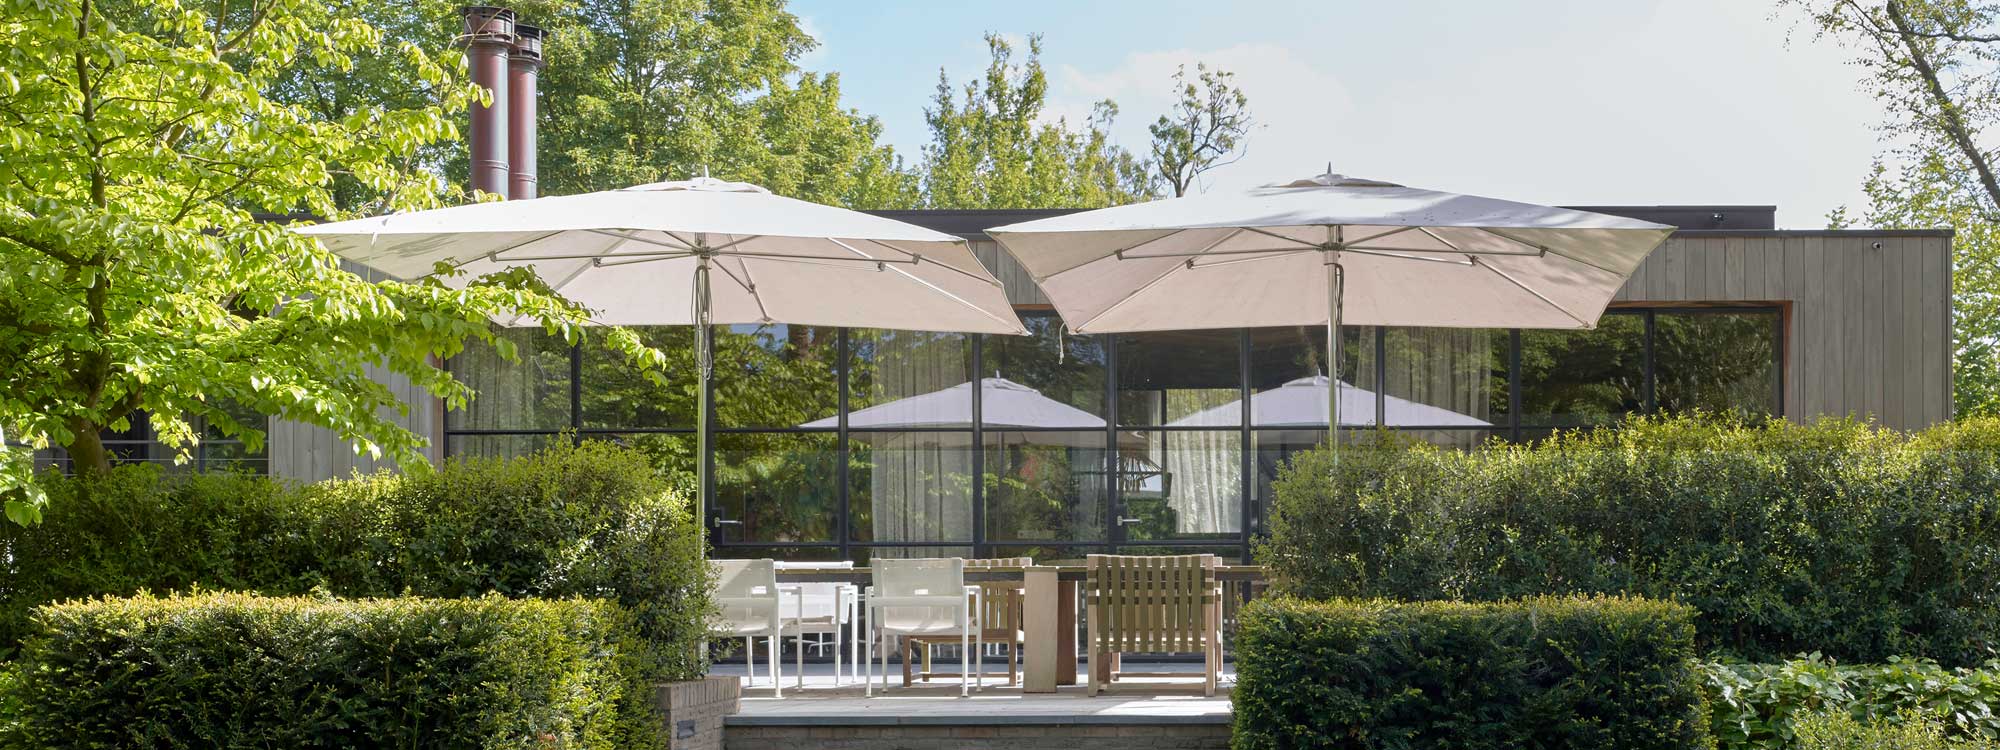 Image of white Tuuci Ocean Master mast parasols with polished titanium mast and ribs on terrace above modern garden furniture